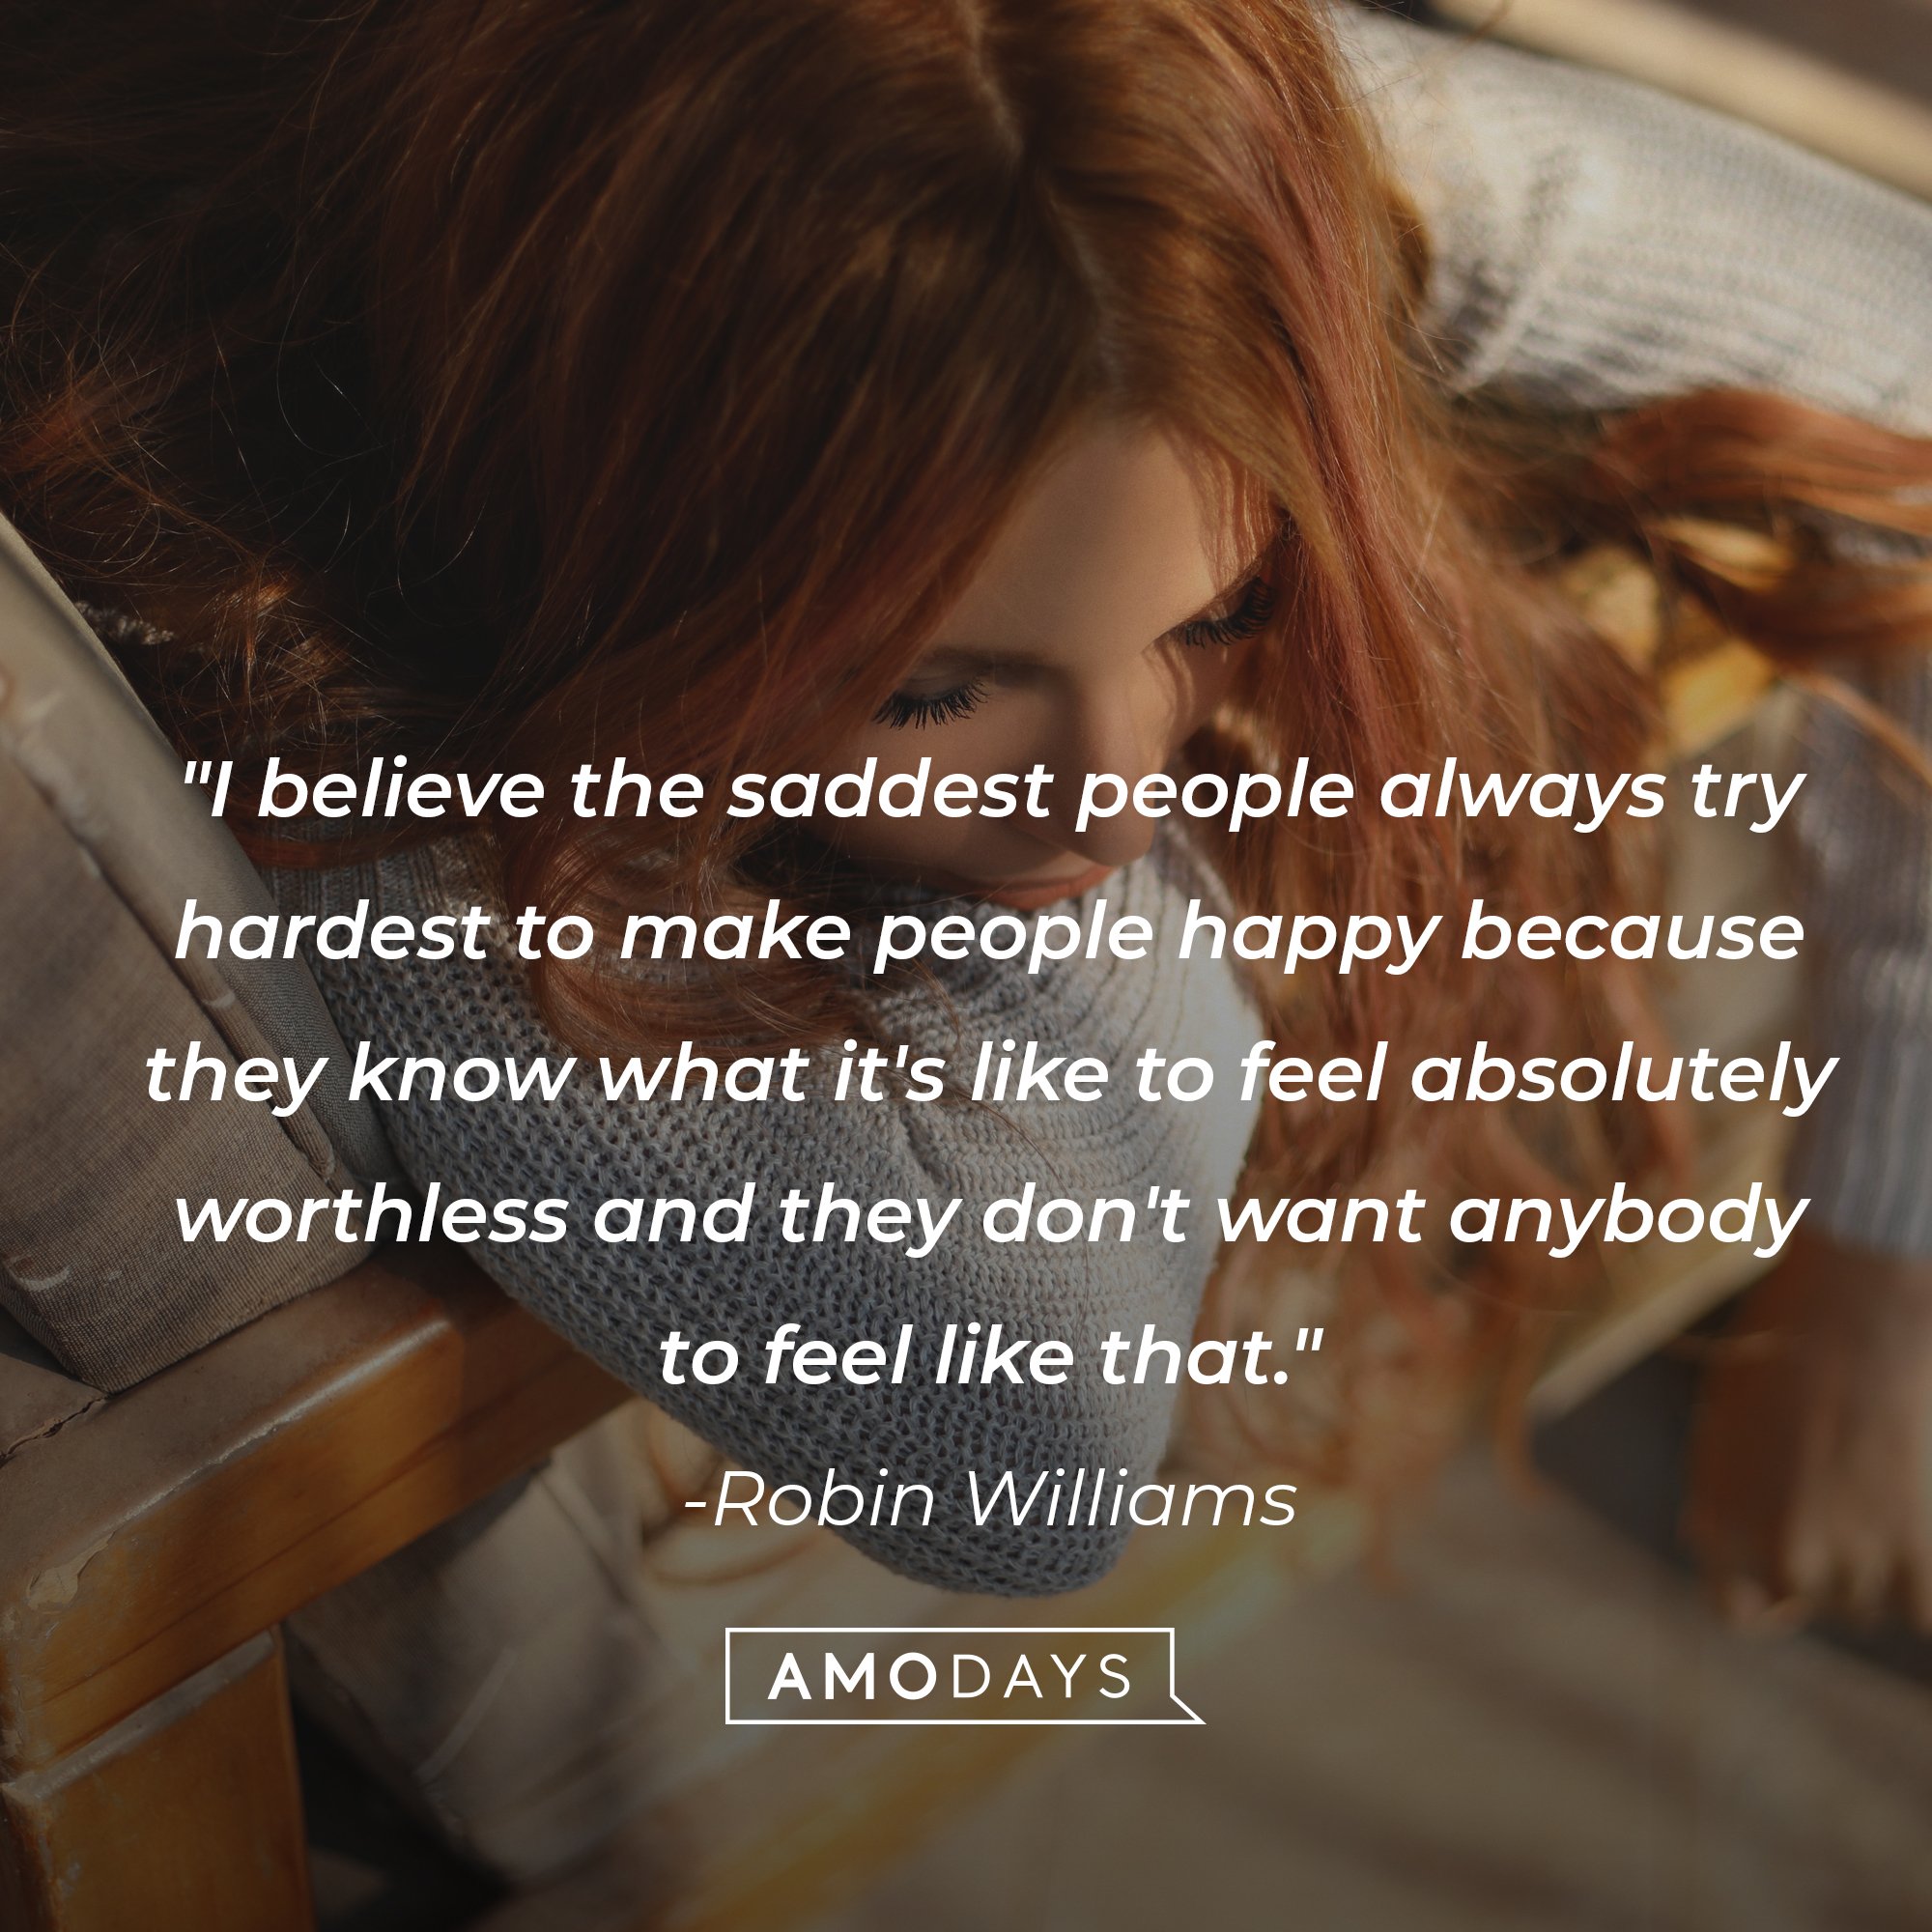 Robin Williams' quote: "I believe the saddest people always try hardest to make people happy because they know what it's like to feel absolutely worthless and they don't want anybody to feel like that." | Image: AmoDays